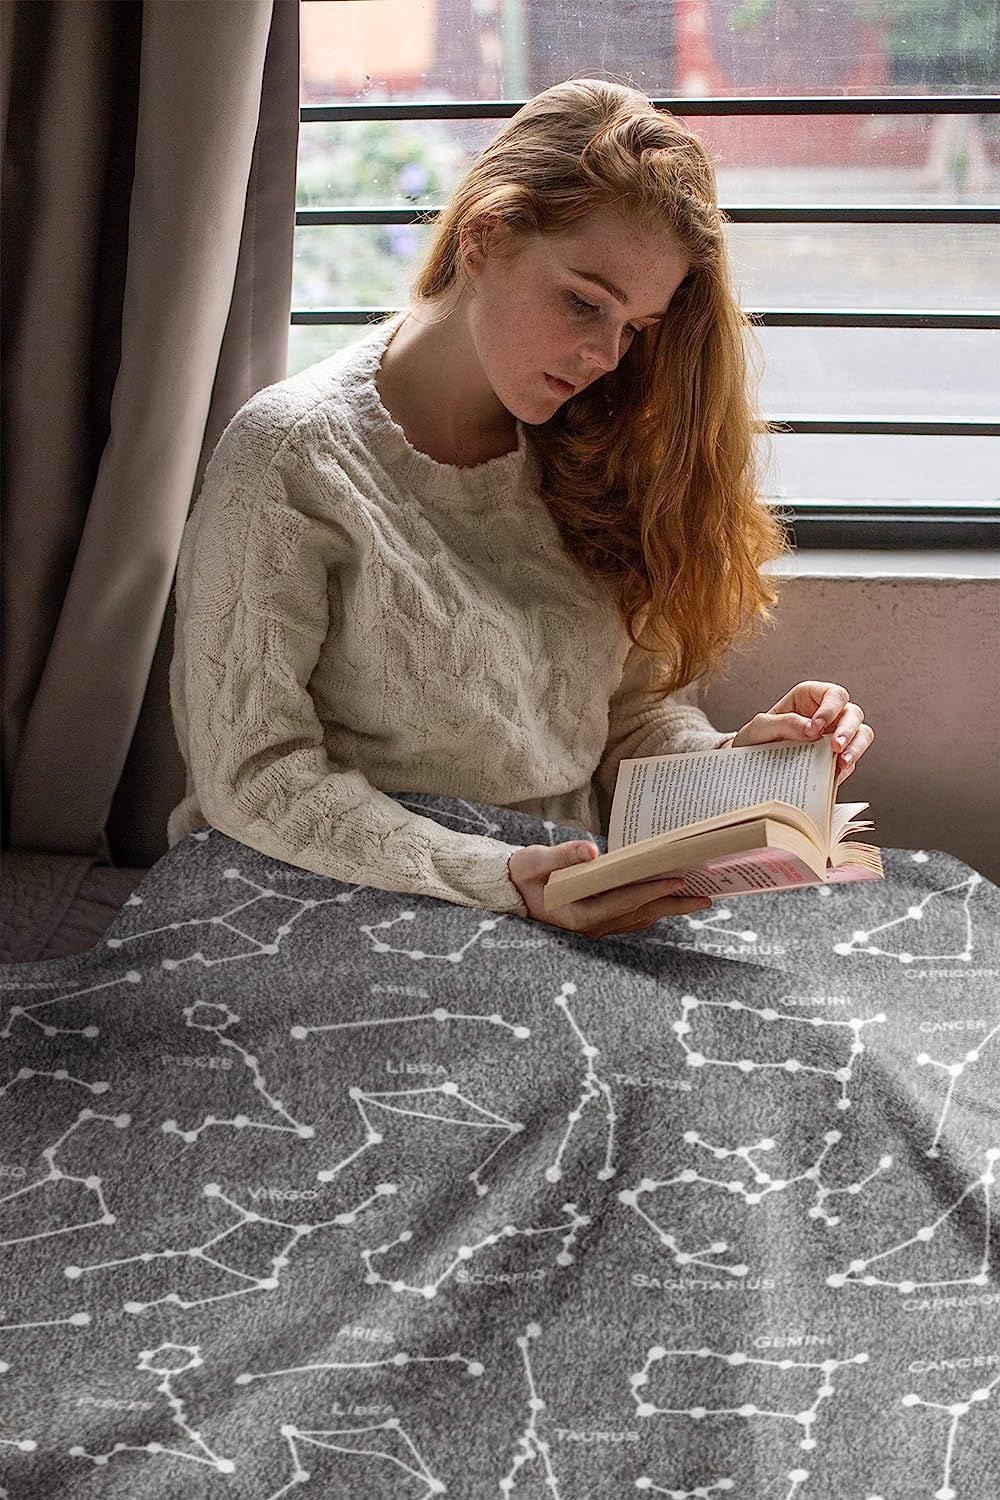 A person is reading while seated with a gray blanket covered in constellations spread across their lower half